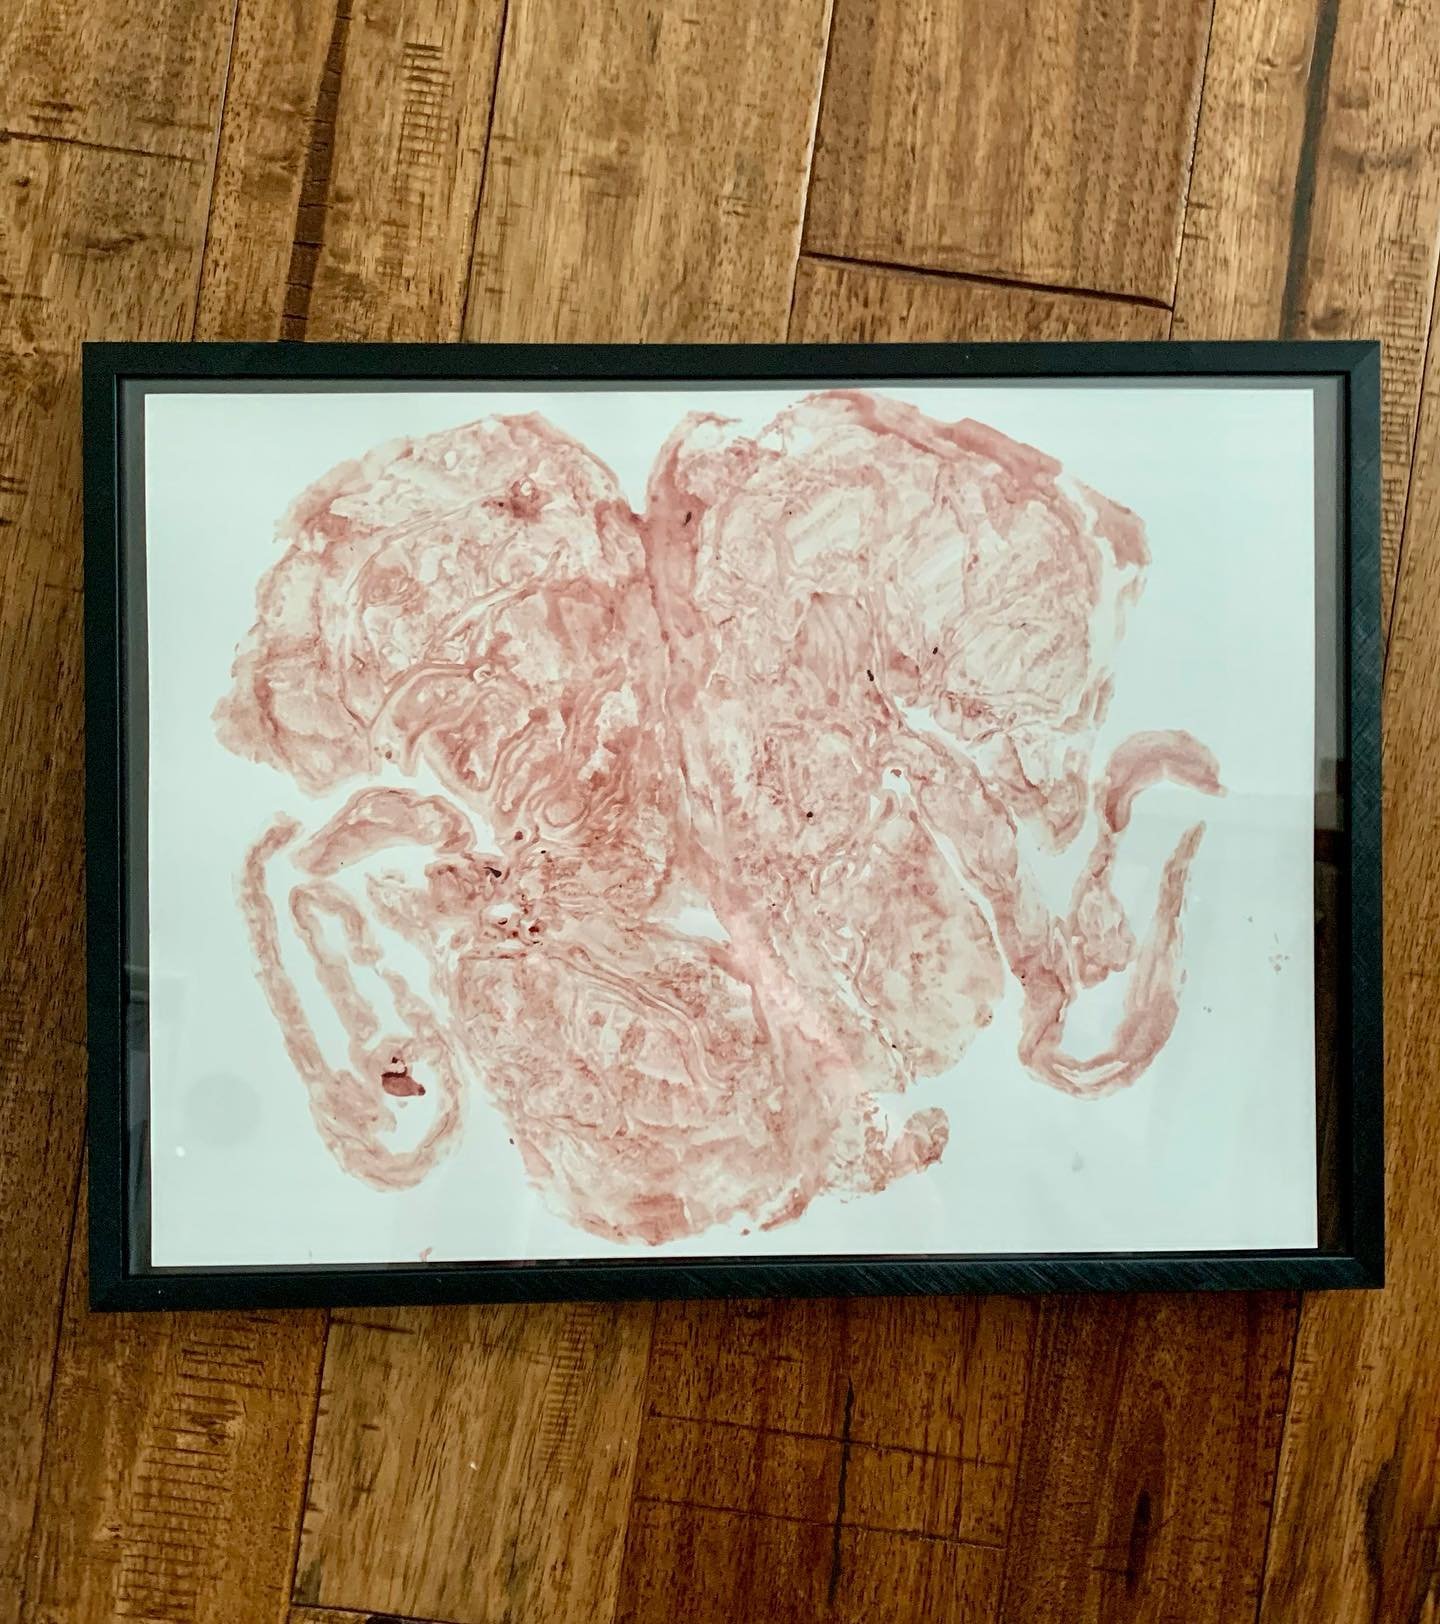 What an honor to encapsulate the twin placentas and get to make and frame a print for a sweet mama! The placentas were fused together and created a beautiful heart shape! 
#placenta #placentaencapsulation #placentaspecialist #twins #doula #birthdoula